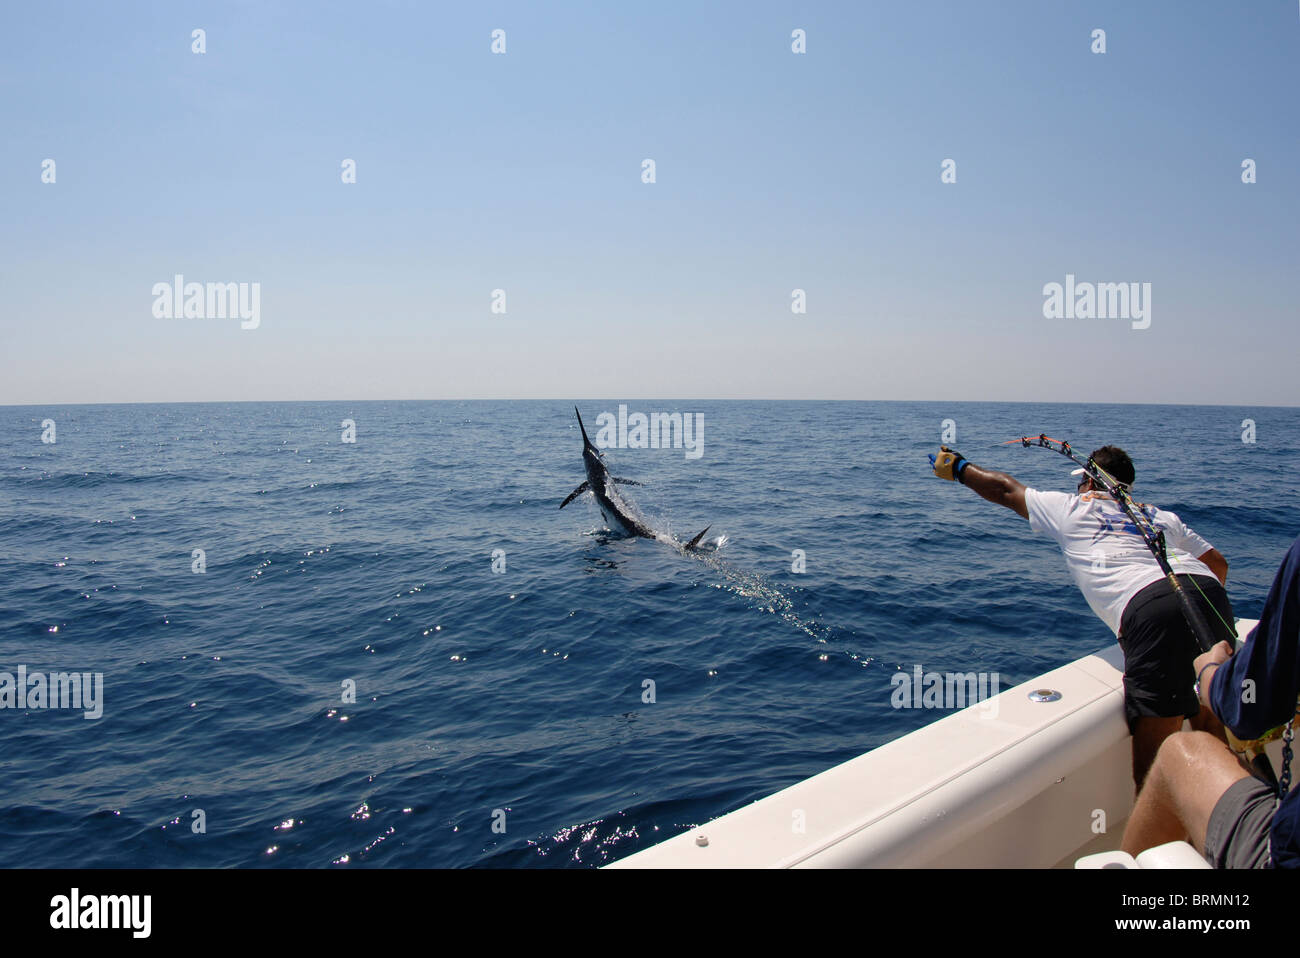 Blue Marlin caught by a fly fisherman being assisted by crew to land it while the fish jumps to try and throw the hook. Stock Photo